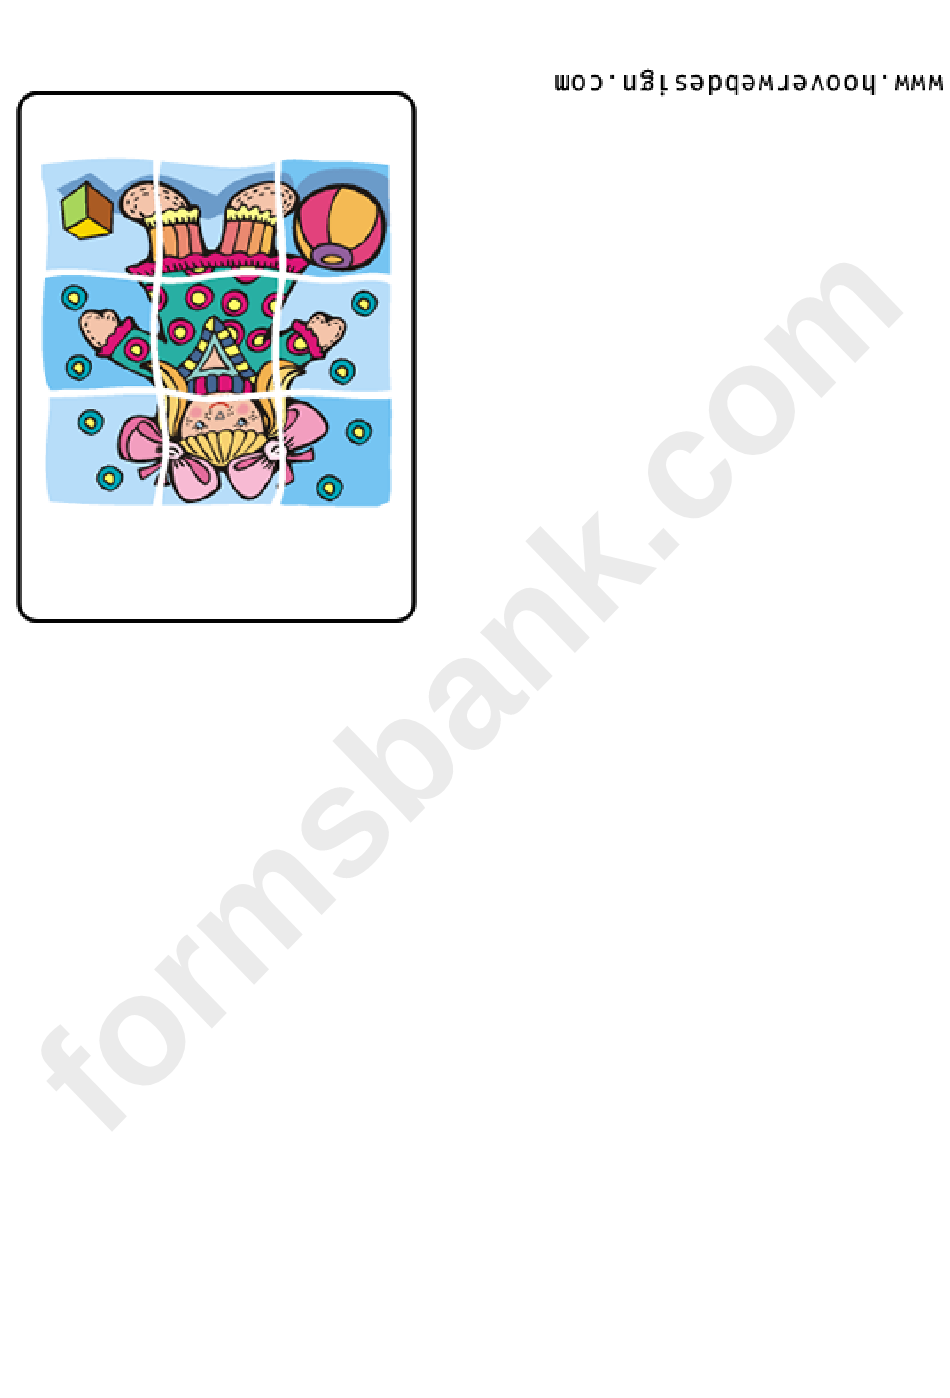 Doll Greeting Card Template